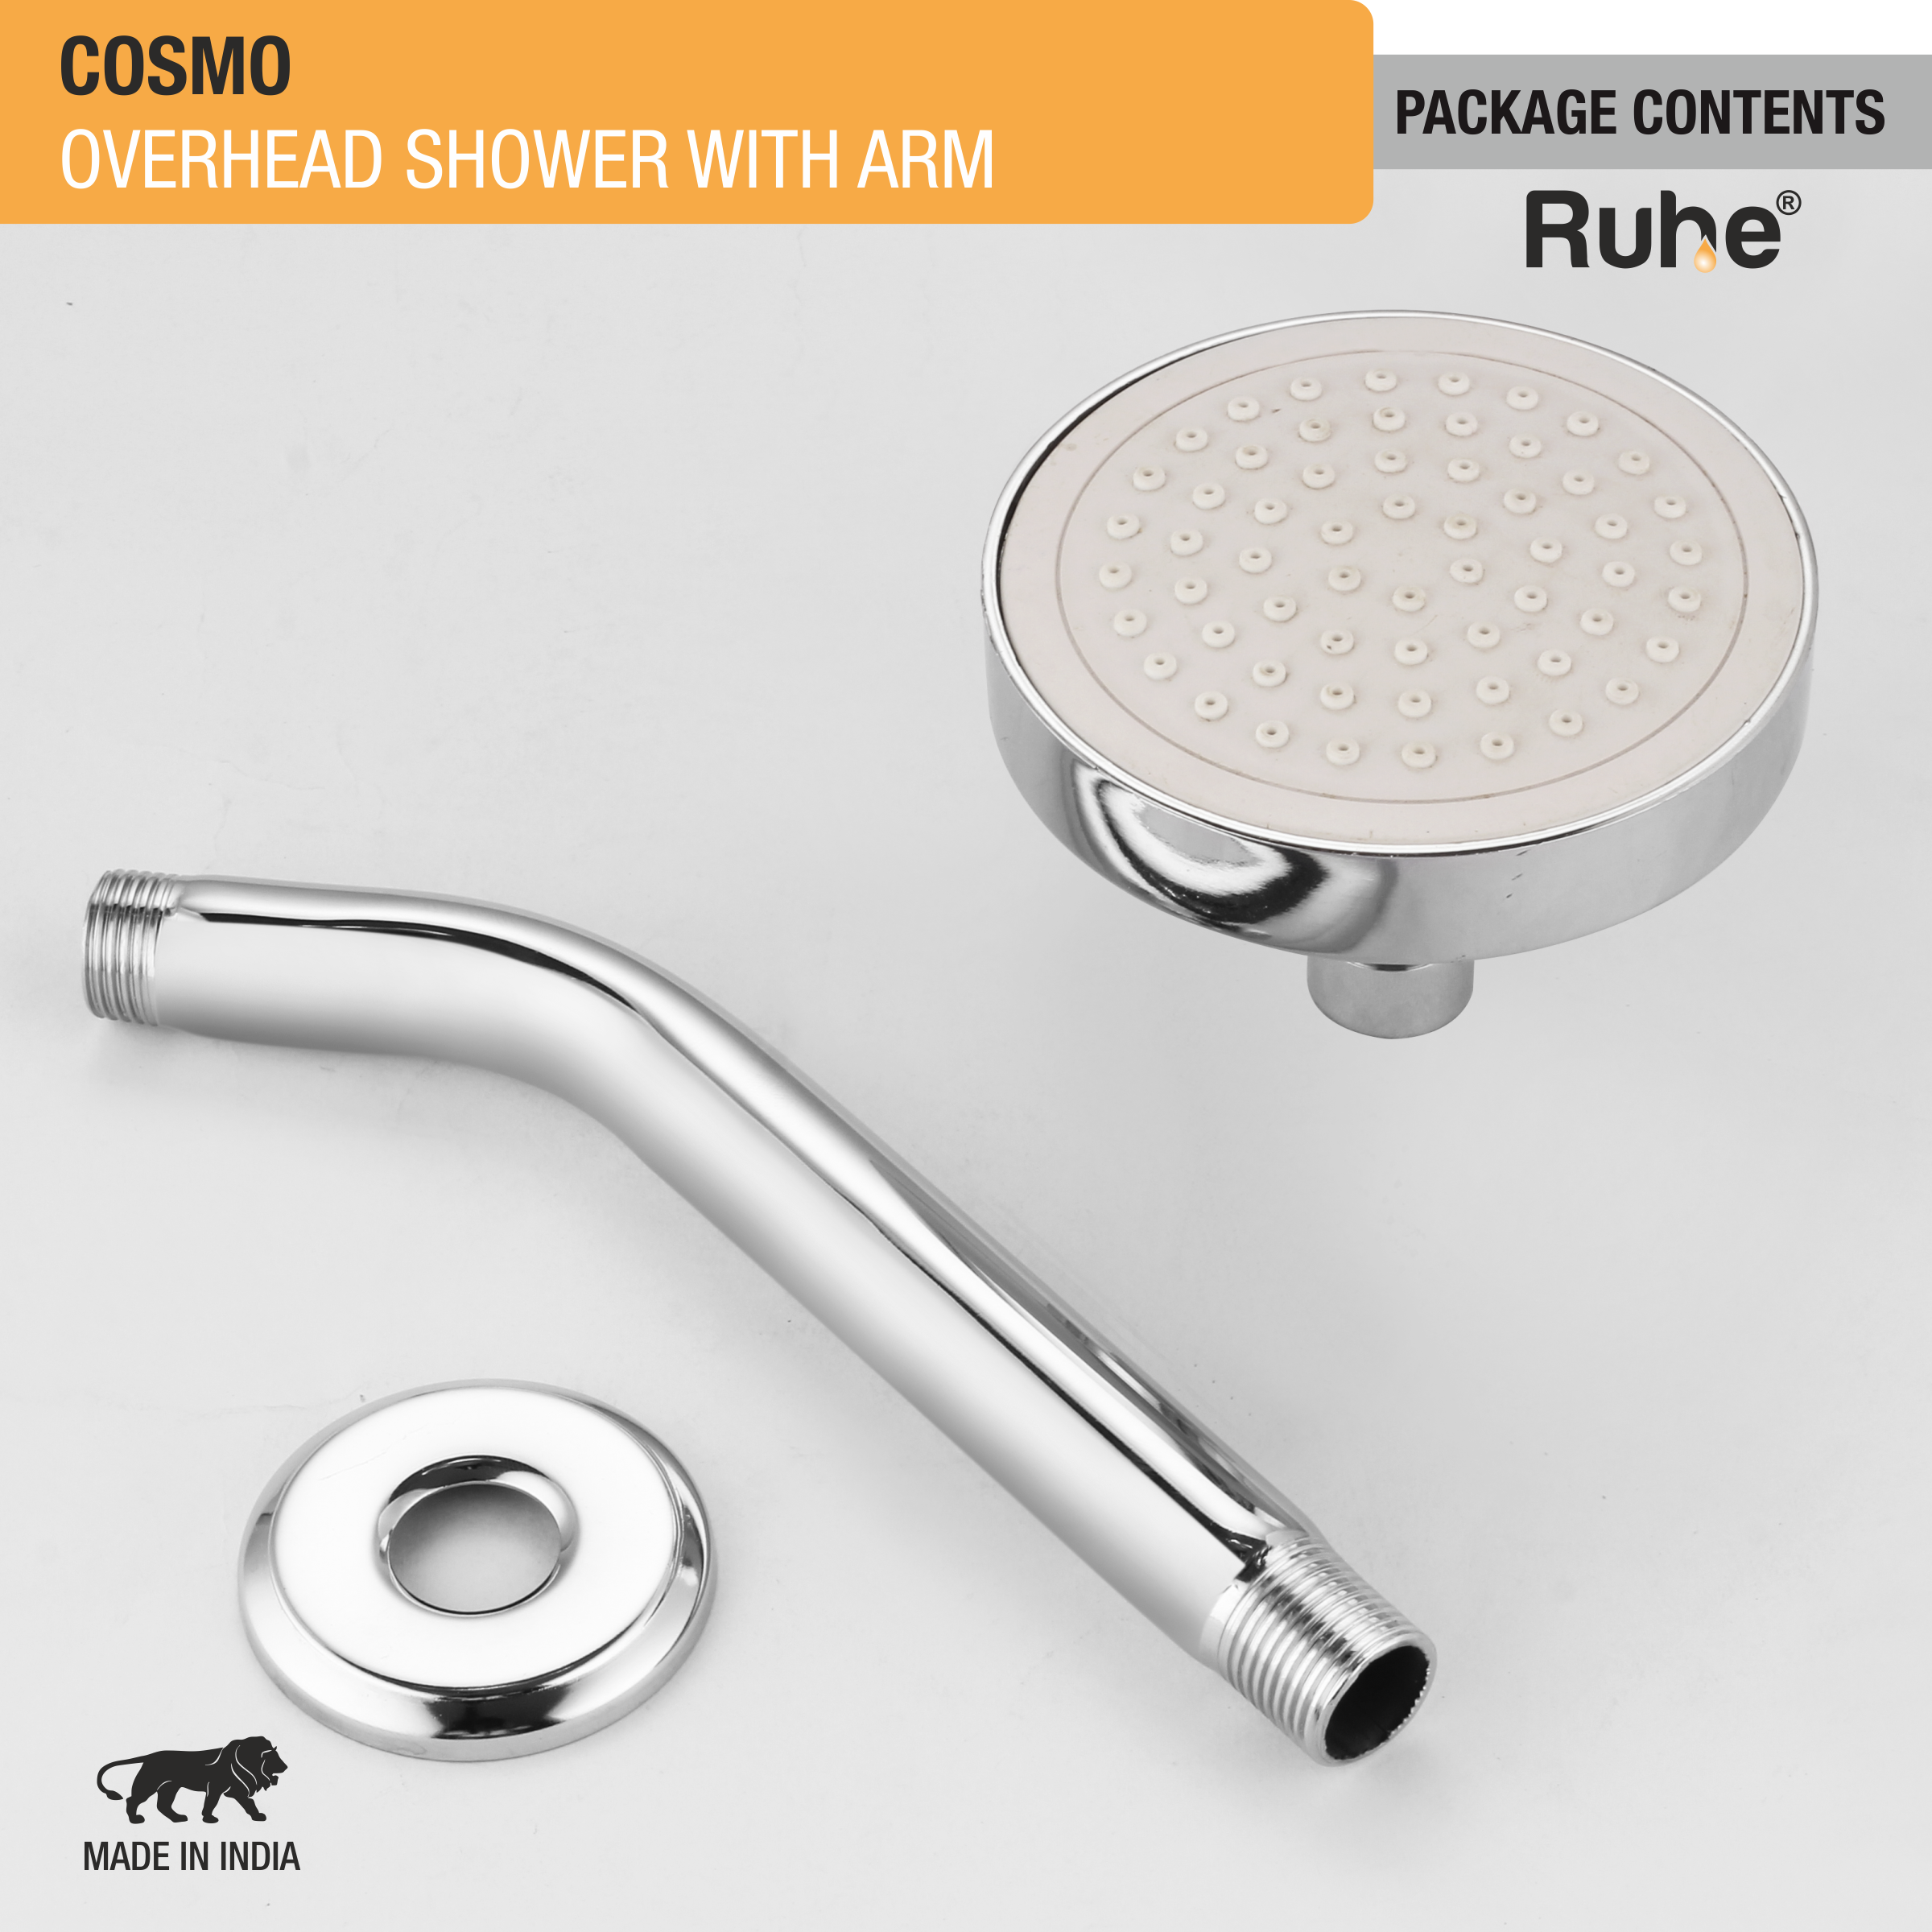 Cosmo Overhead Shower (4 Inches) with Shower Arm package content